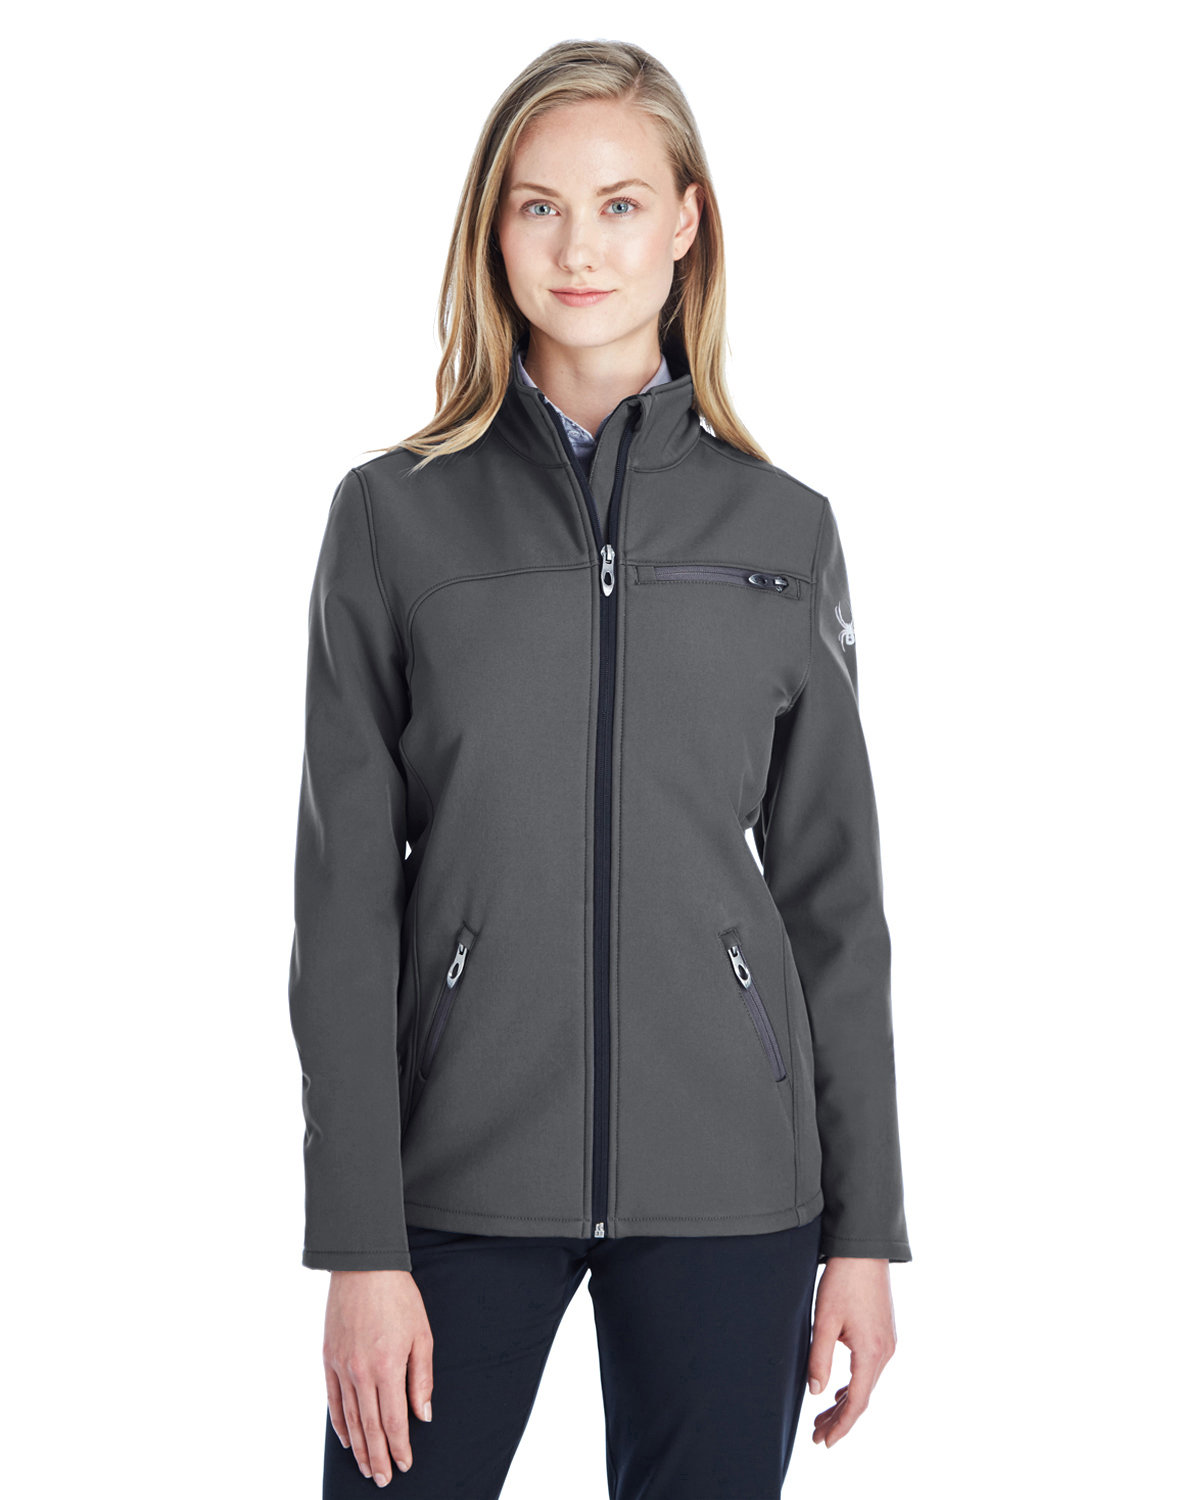 Front view of Ladies’ Transport Soft Shell Jacket